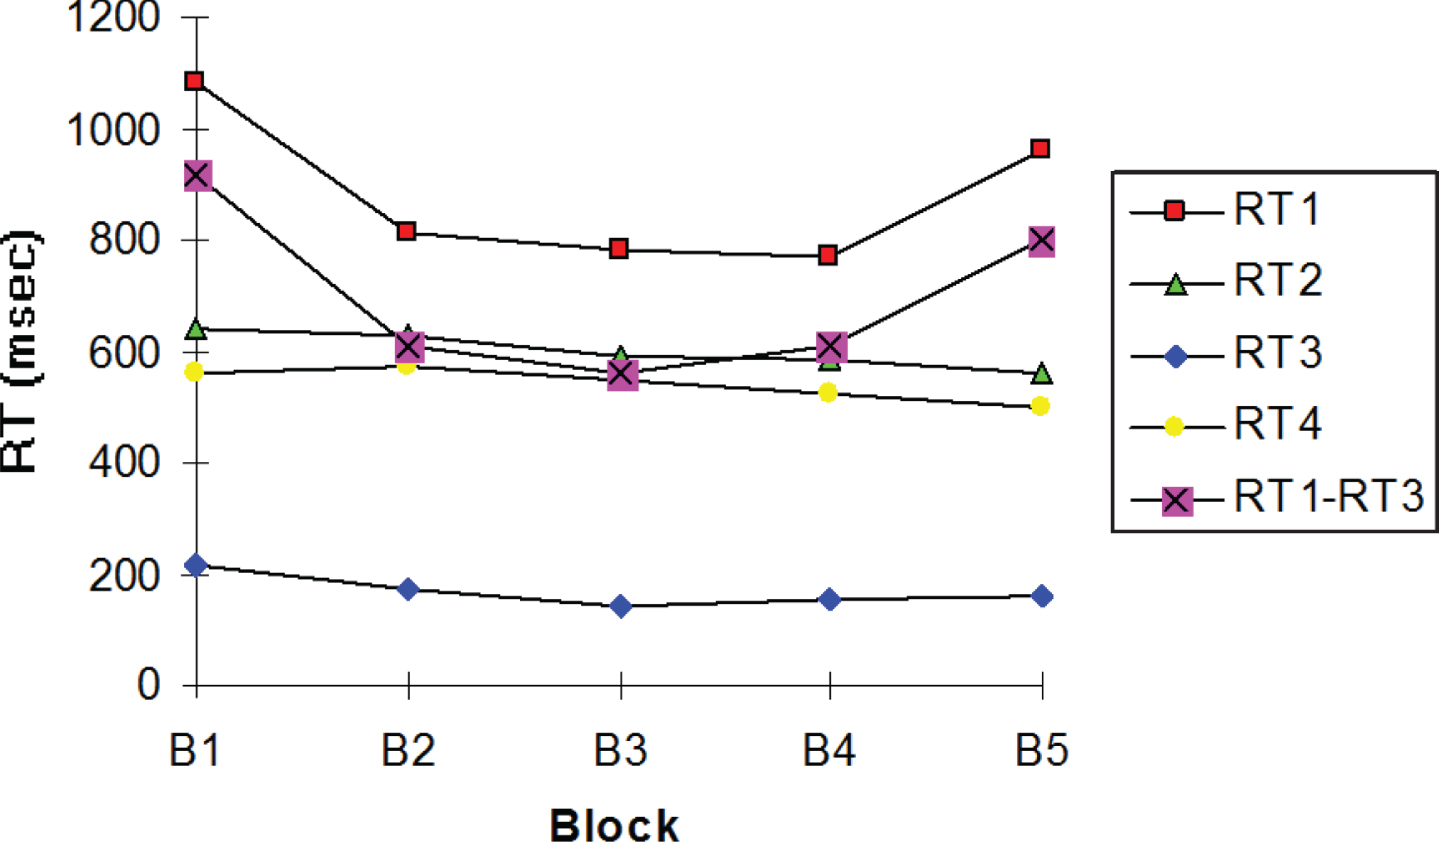 Median reaction times (RT) in milliseconds in each block of the MS group. RT1, The “RT of semantic categorization and motor initiation”; RT2, The “RT of visual-spatial search”; RT3, The “RT of motor initiation”; RT4, The “RT of motor movement”; RT1–RT3, The “RT of semantic categorization”: RT1 minus RT3.